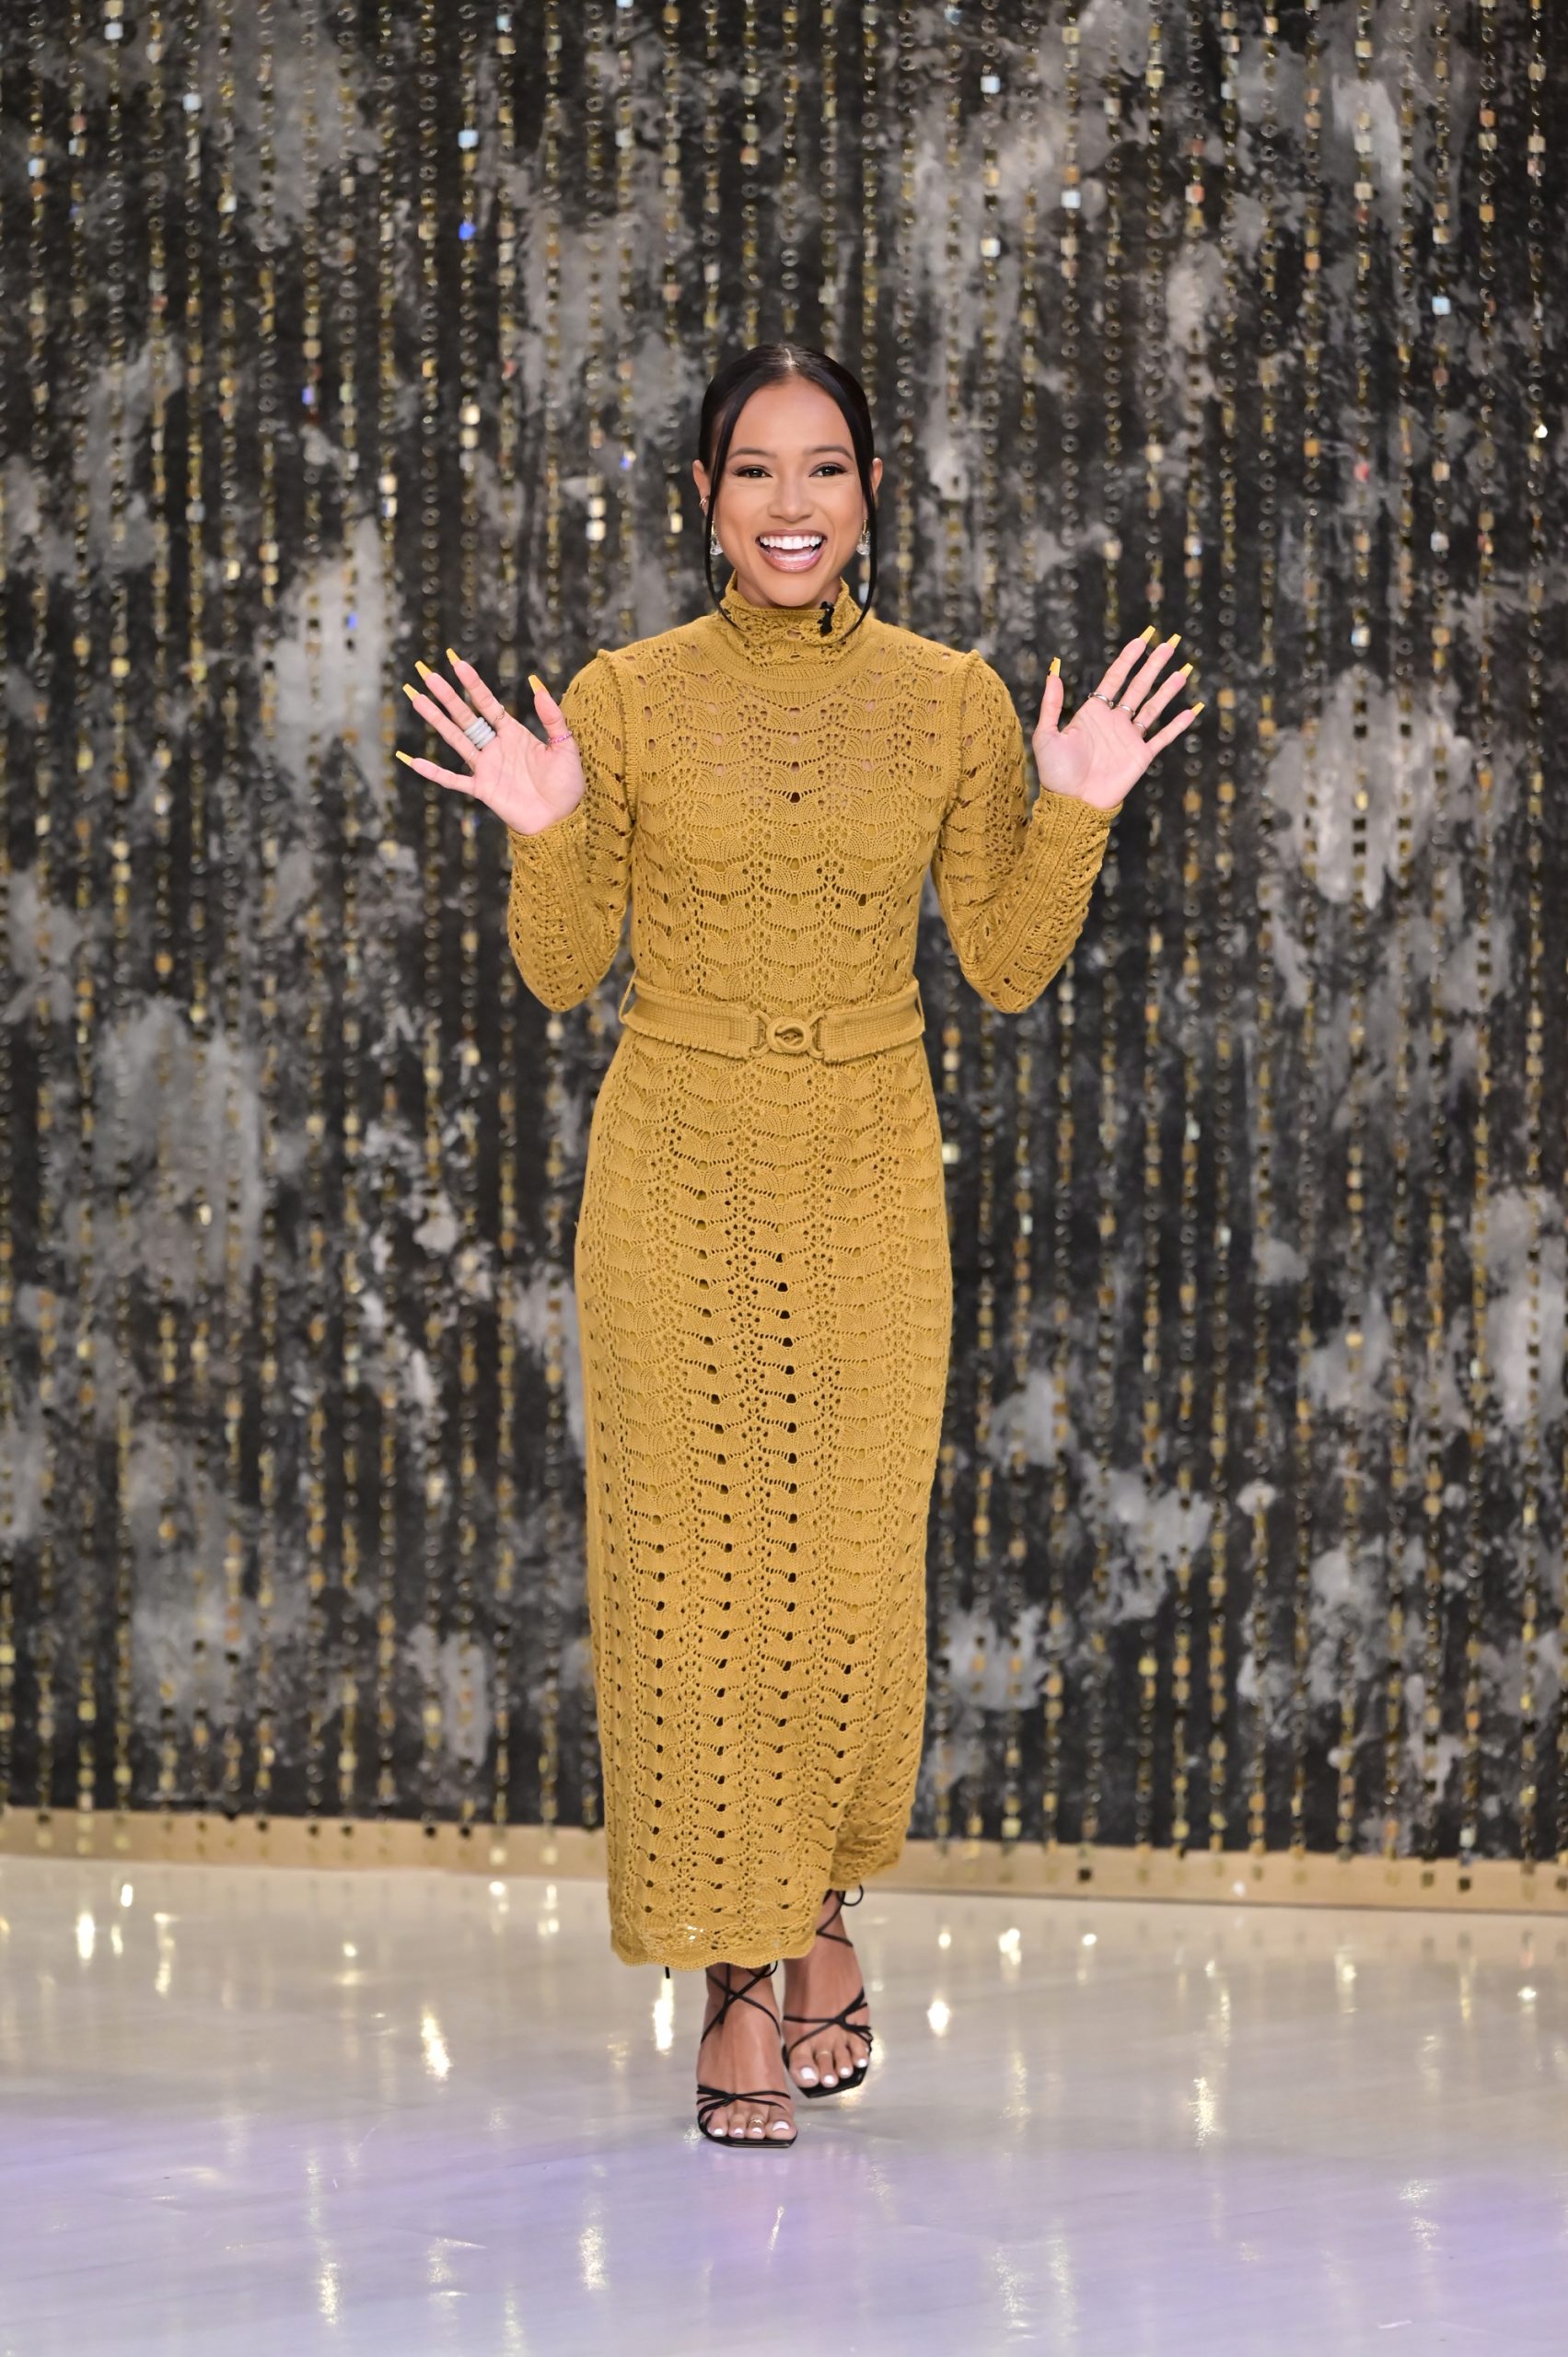 In Case You Missed It:  Karrueche Tran On ‘Tamron Hall Show’